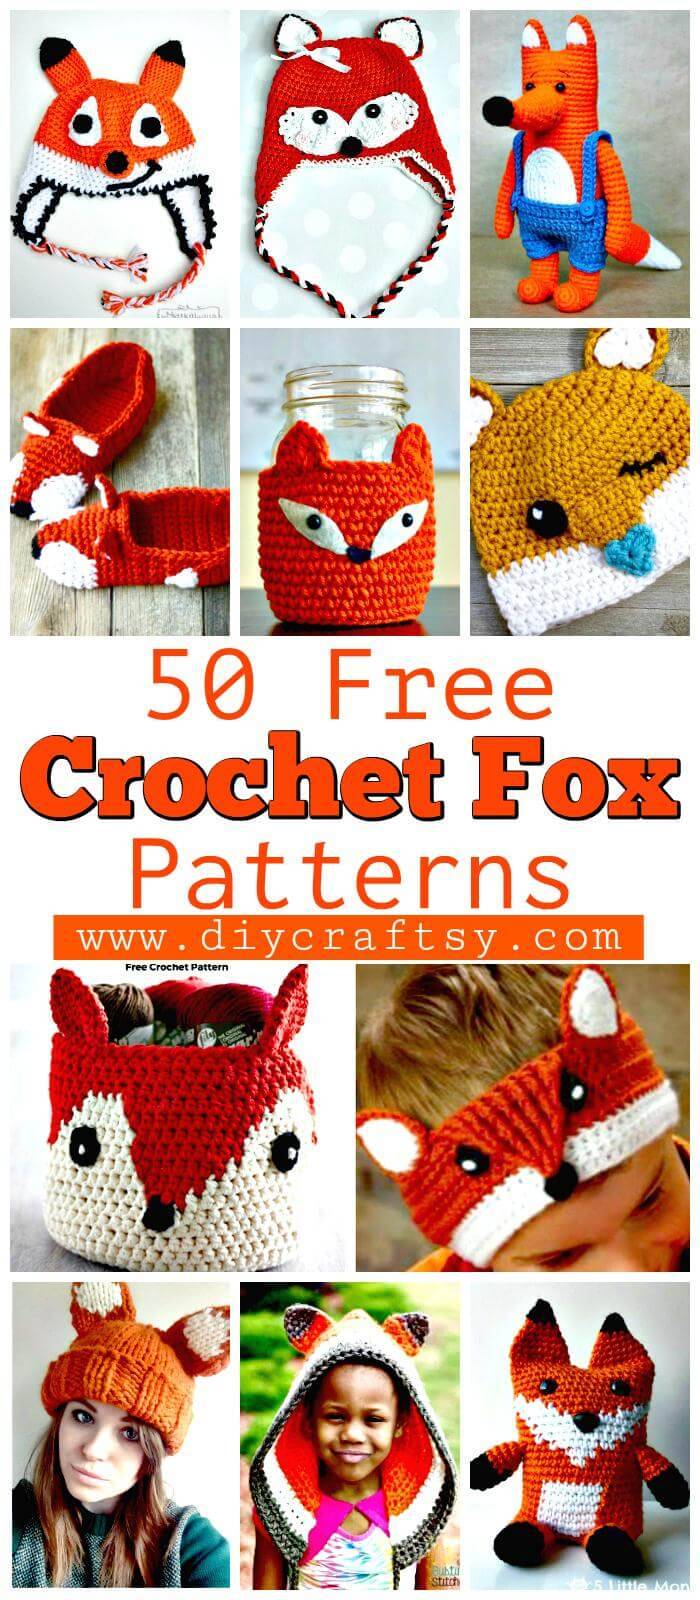 50 Free Crochet Fox Patterns - Crochet Fox Hat - Crochet Blanket, Crochet Basket, Crochet Scarf, Crochet Booties and Much more you want from free crochet patterns.